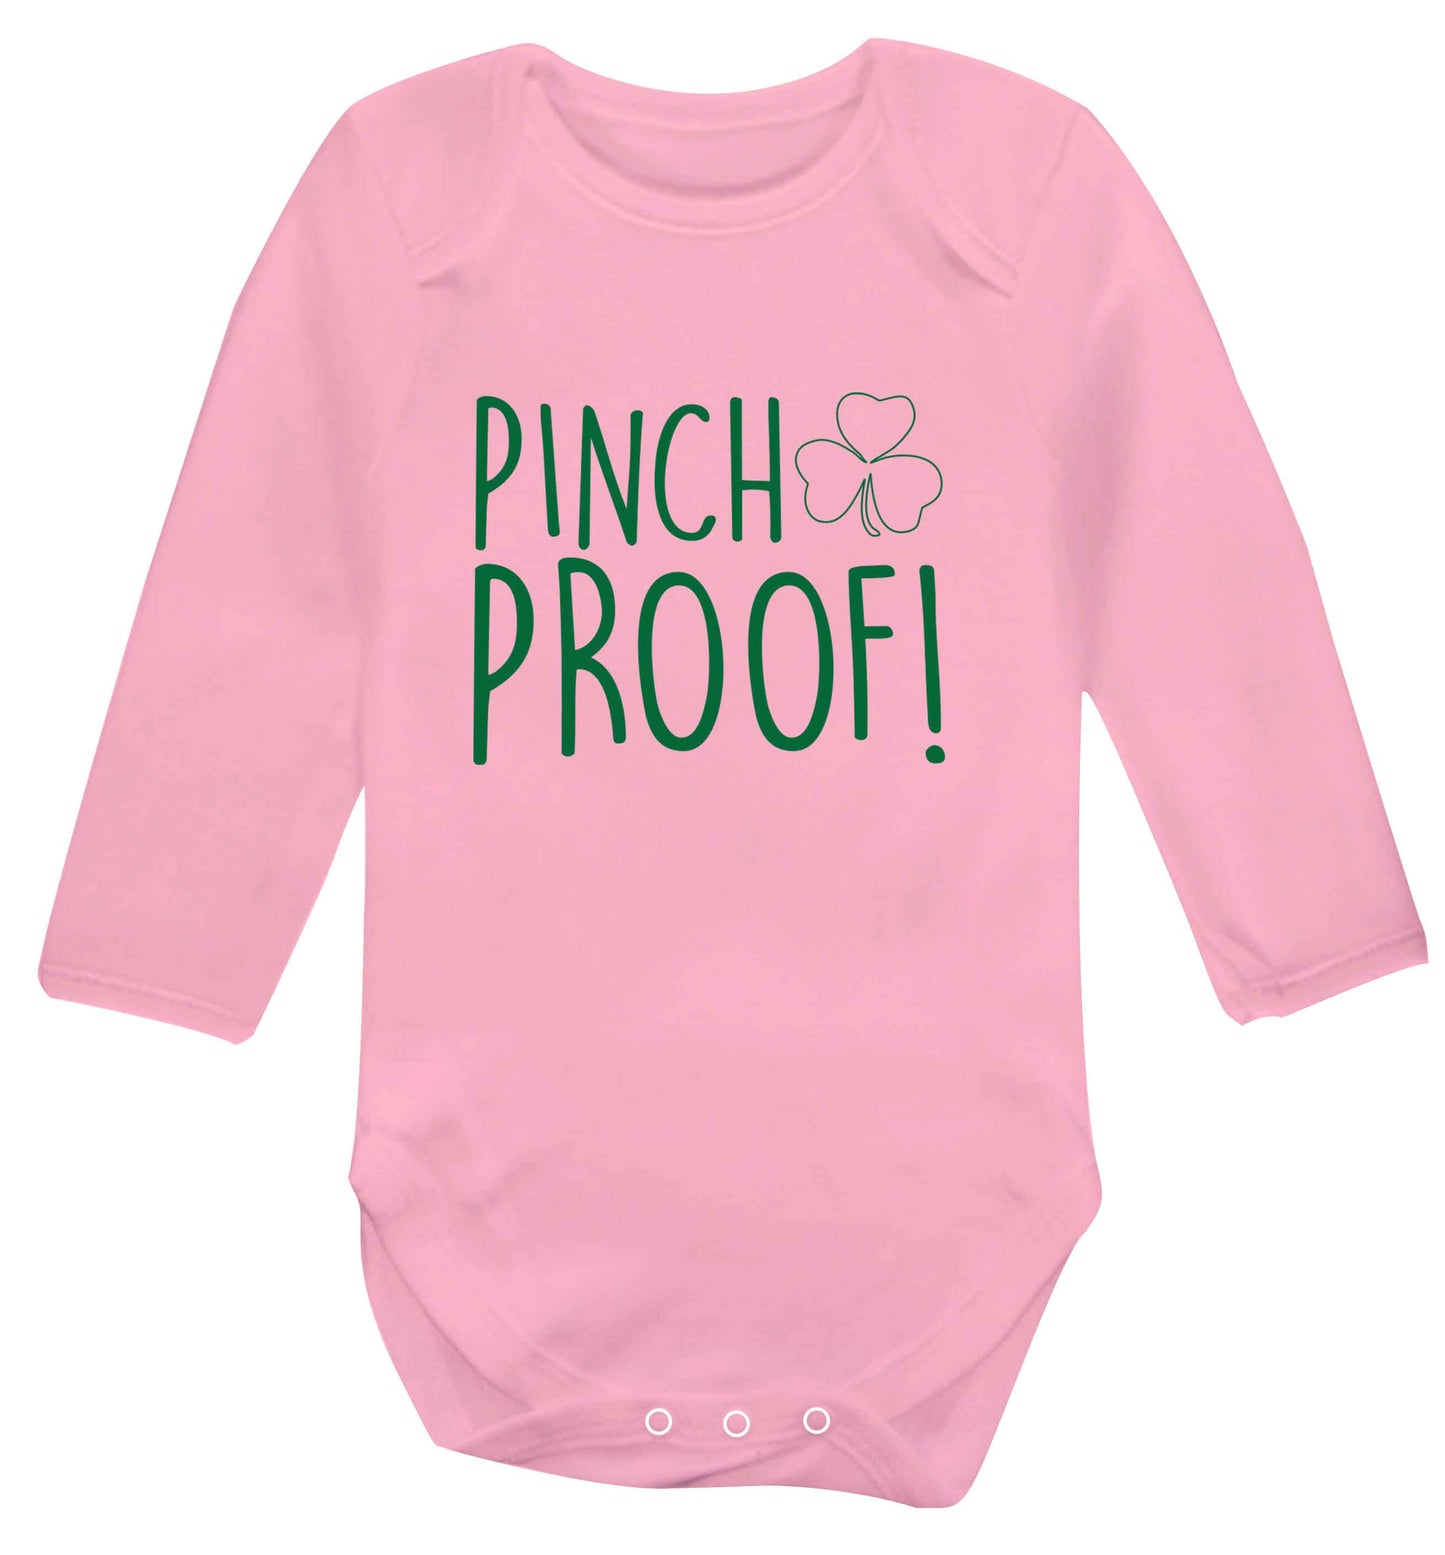 Pinch Proof baby vest long sleeved pale pink 6-12 months